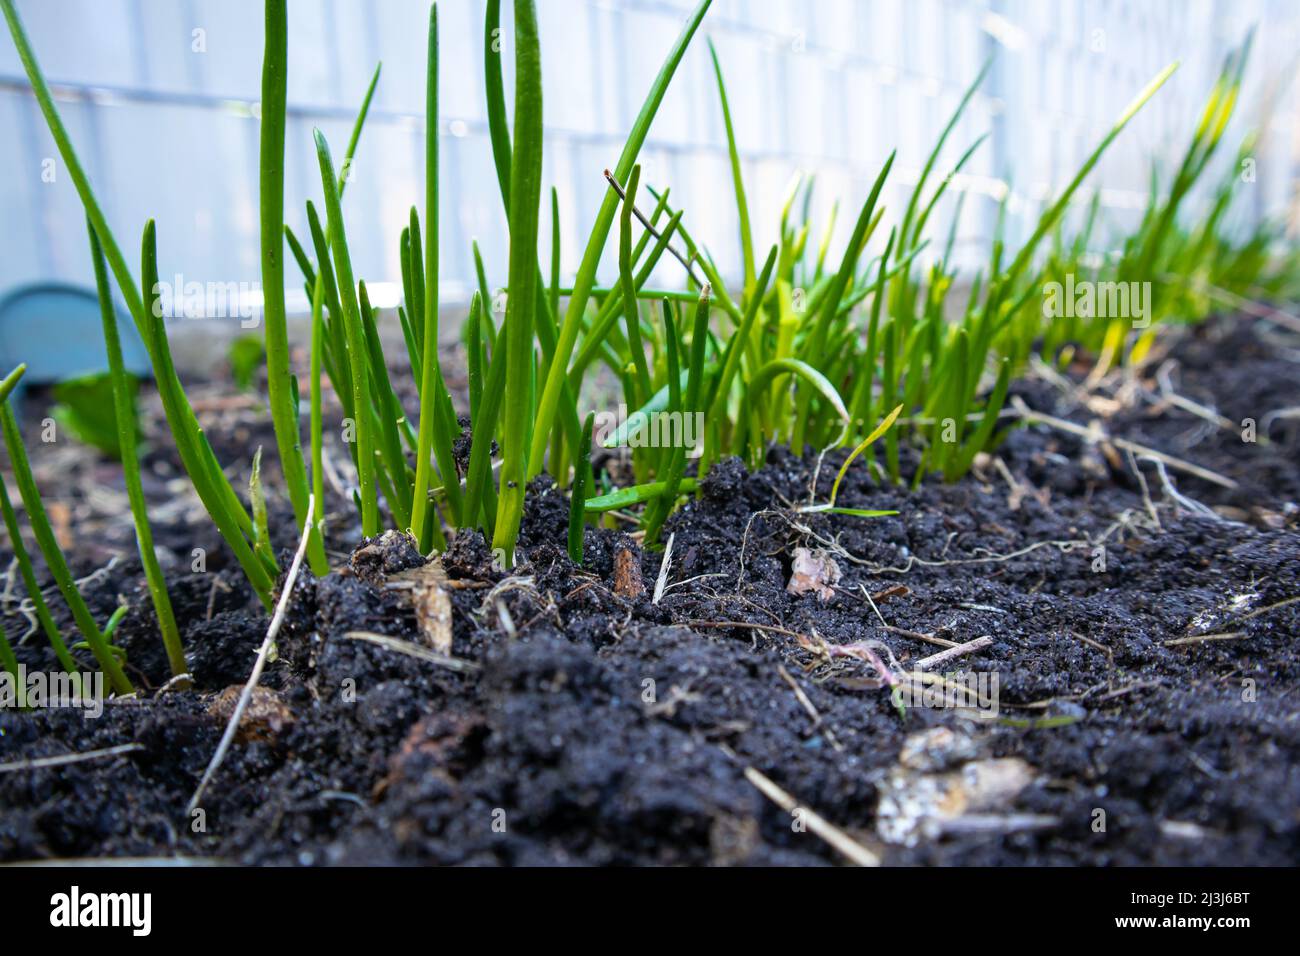 The first greens in spring, green onions in the garden. nature wakes up. Stock Photo